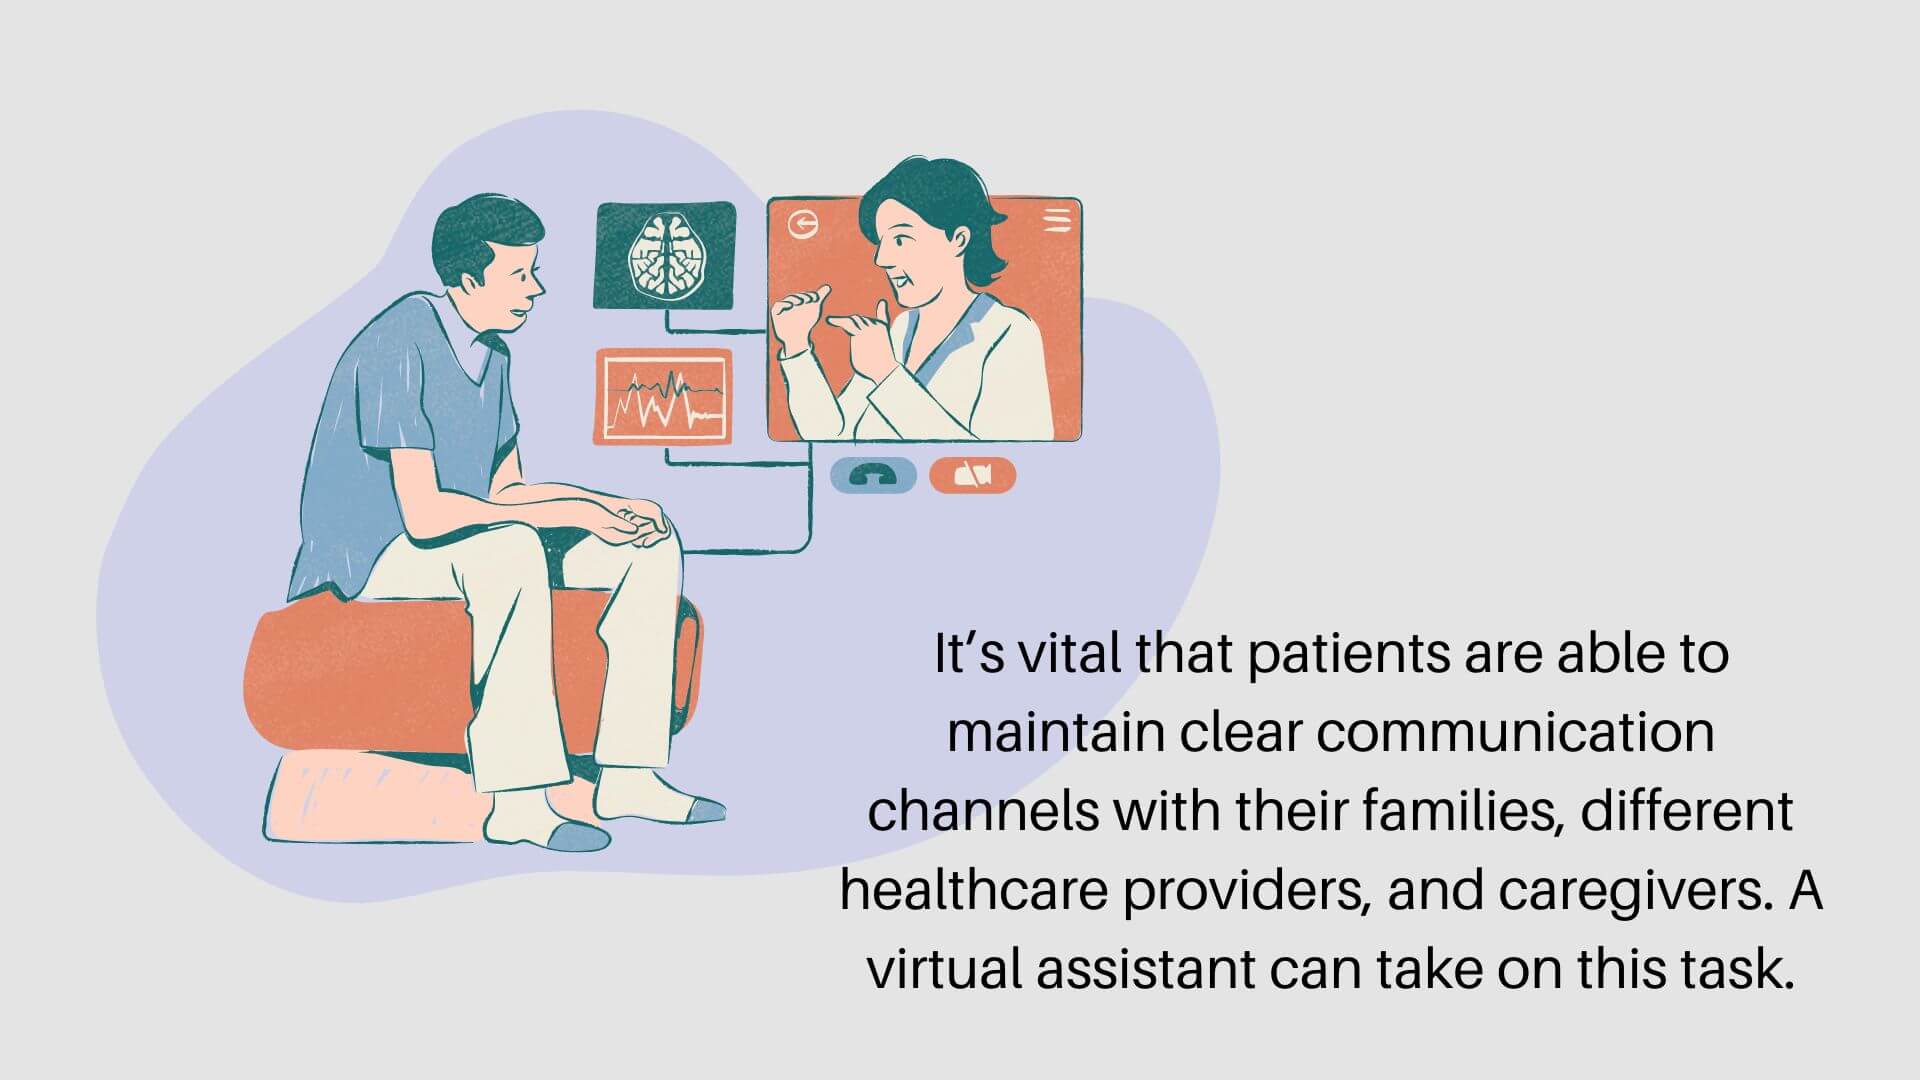 virtual assistants can act as a liaison